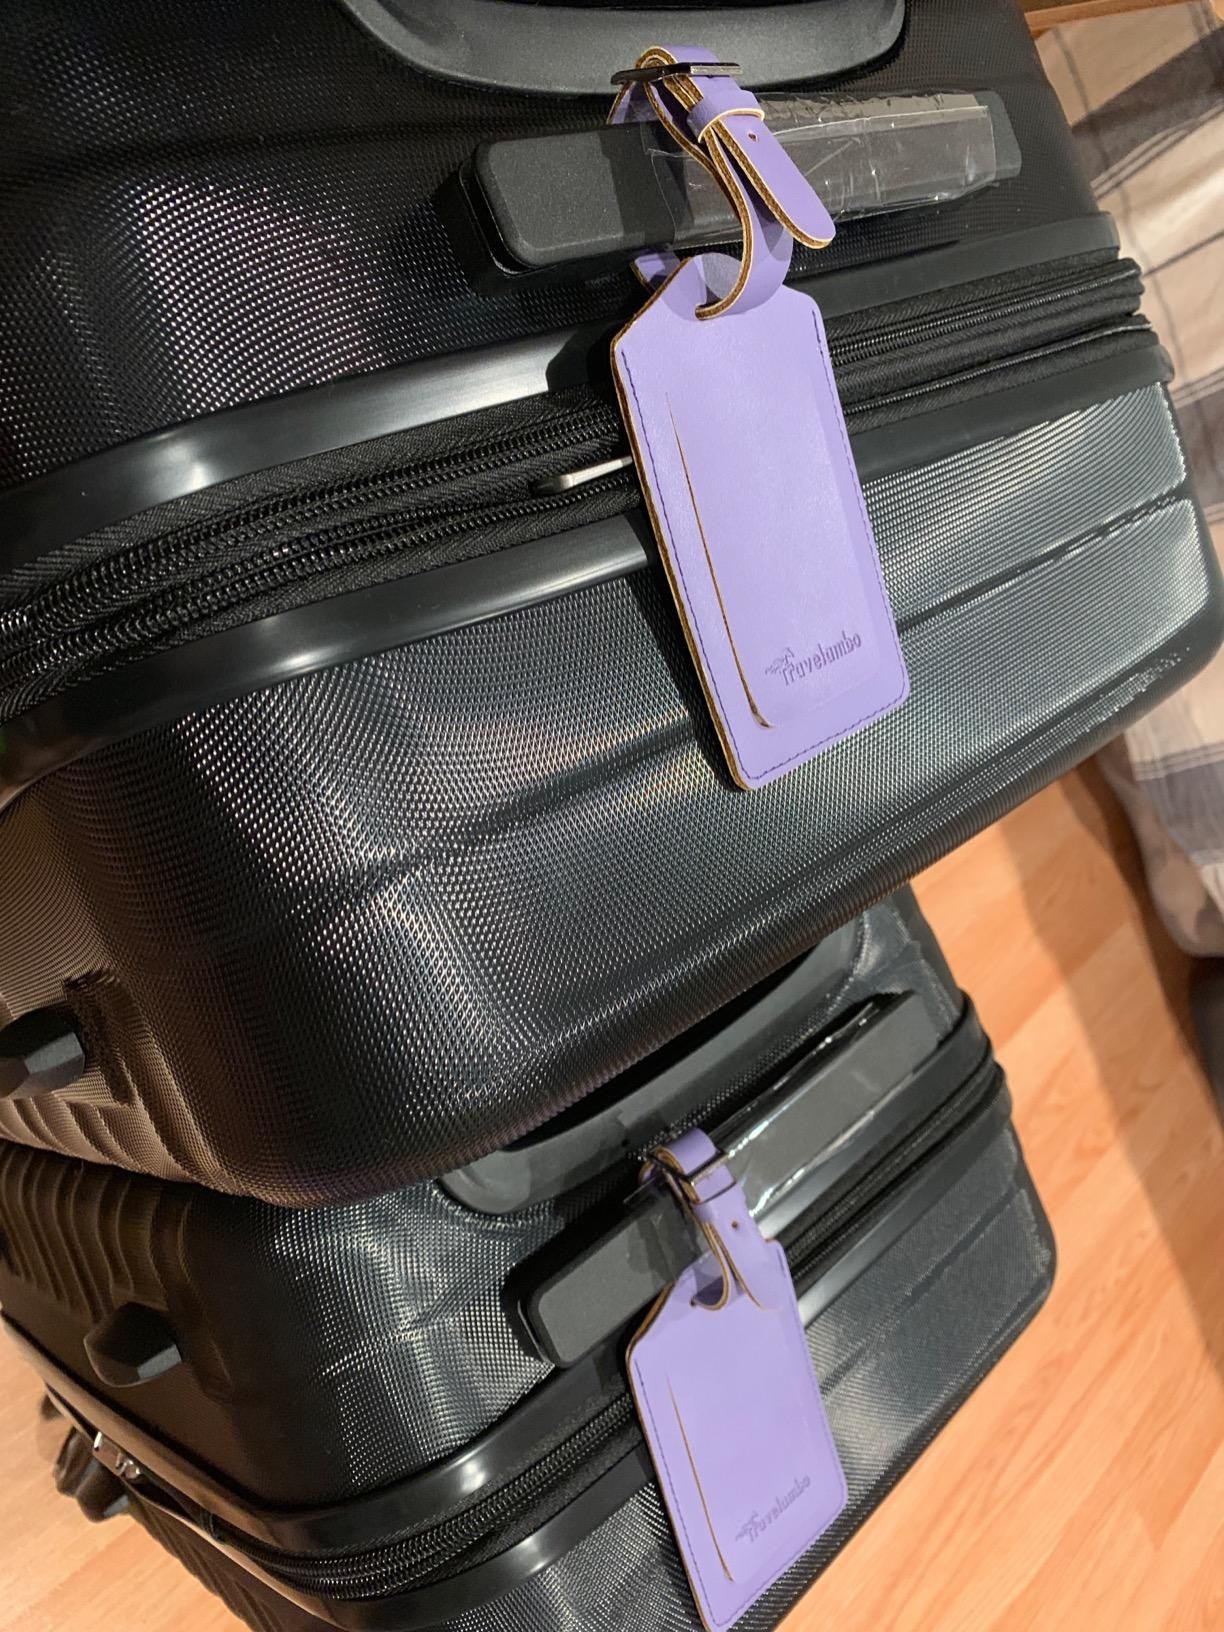 Purple luggage tags on two suitcases